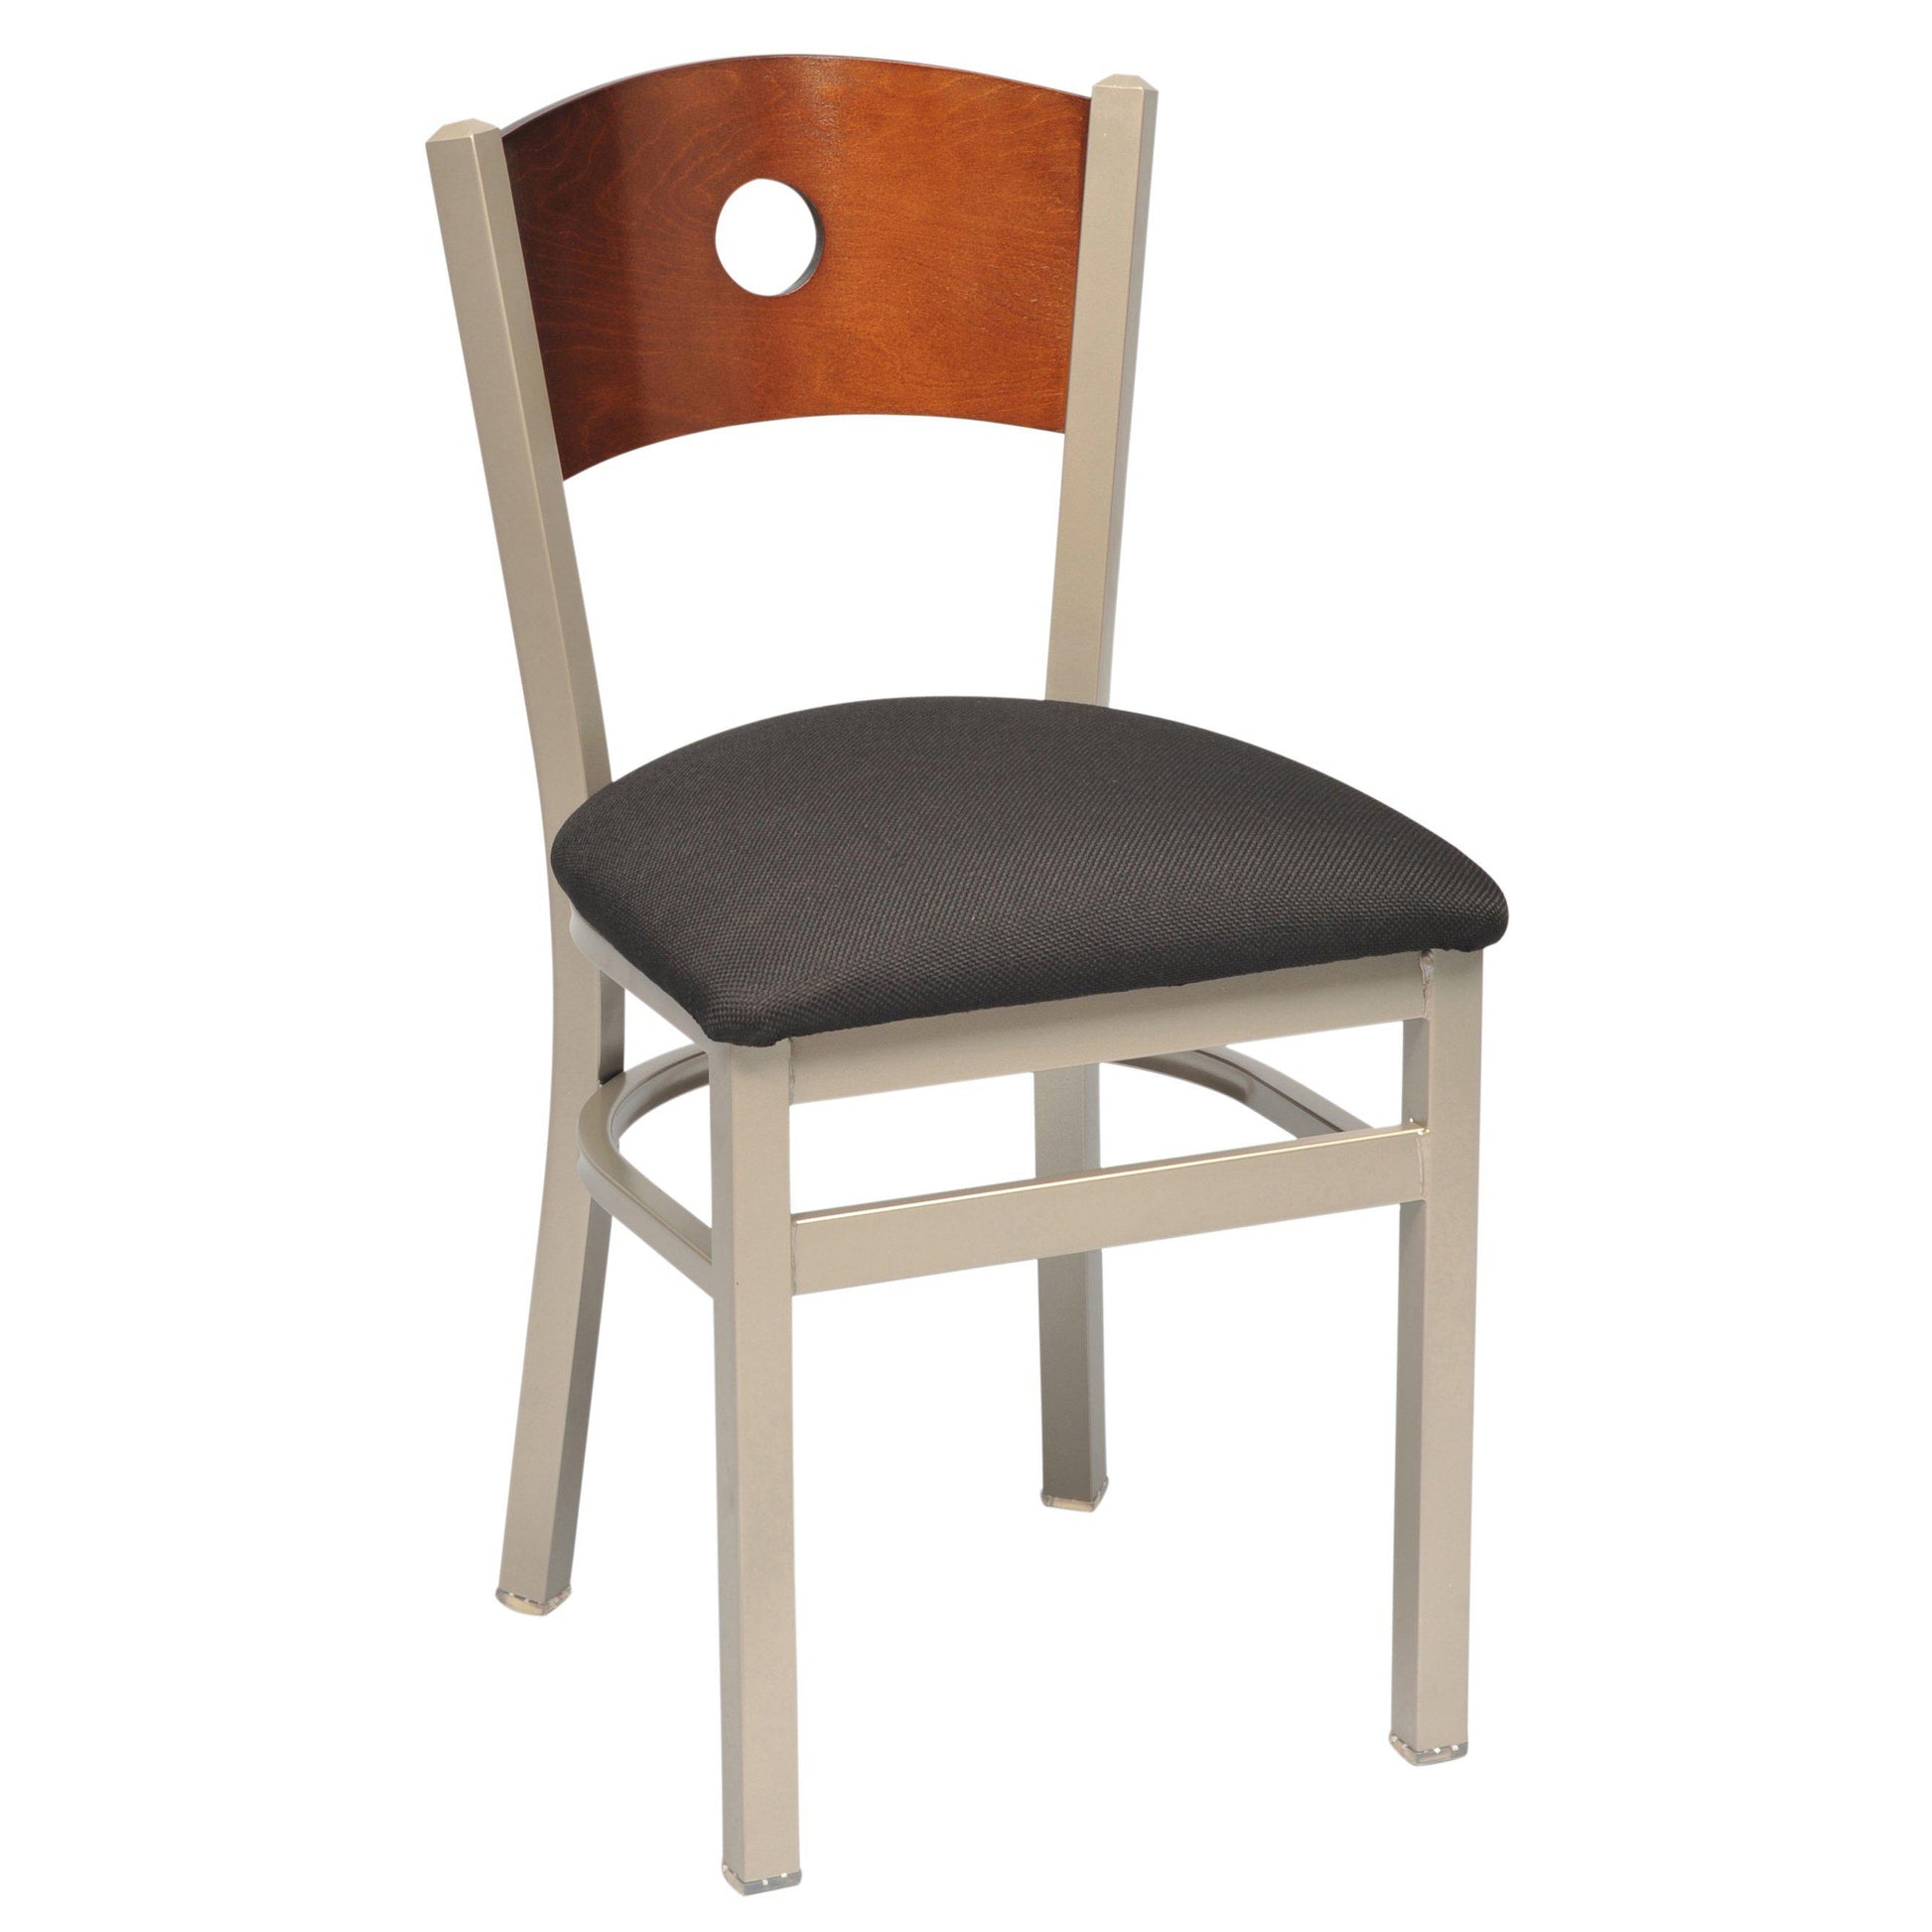 Metal Chair with a Wood Back-Richardson Seating